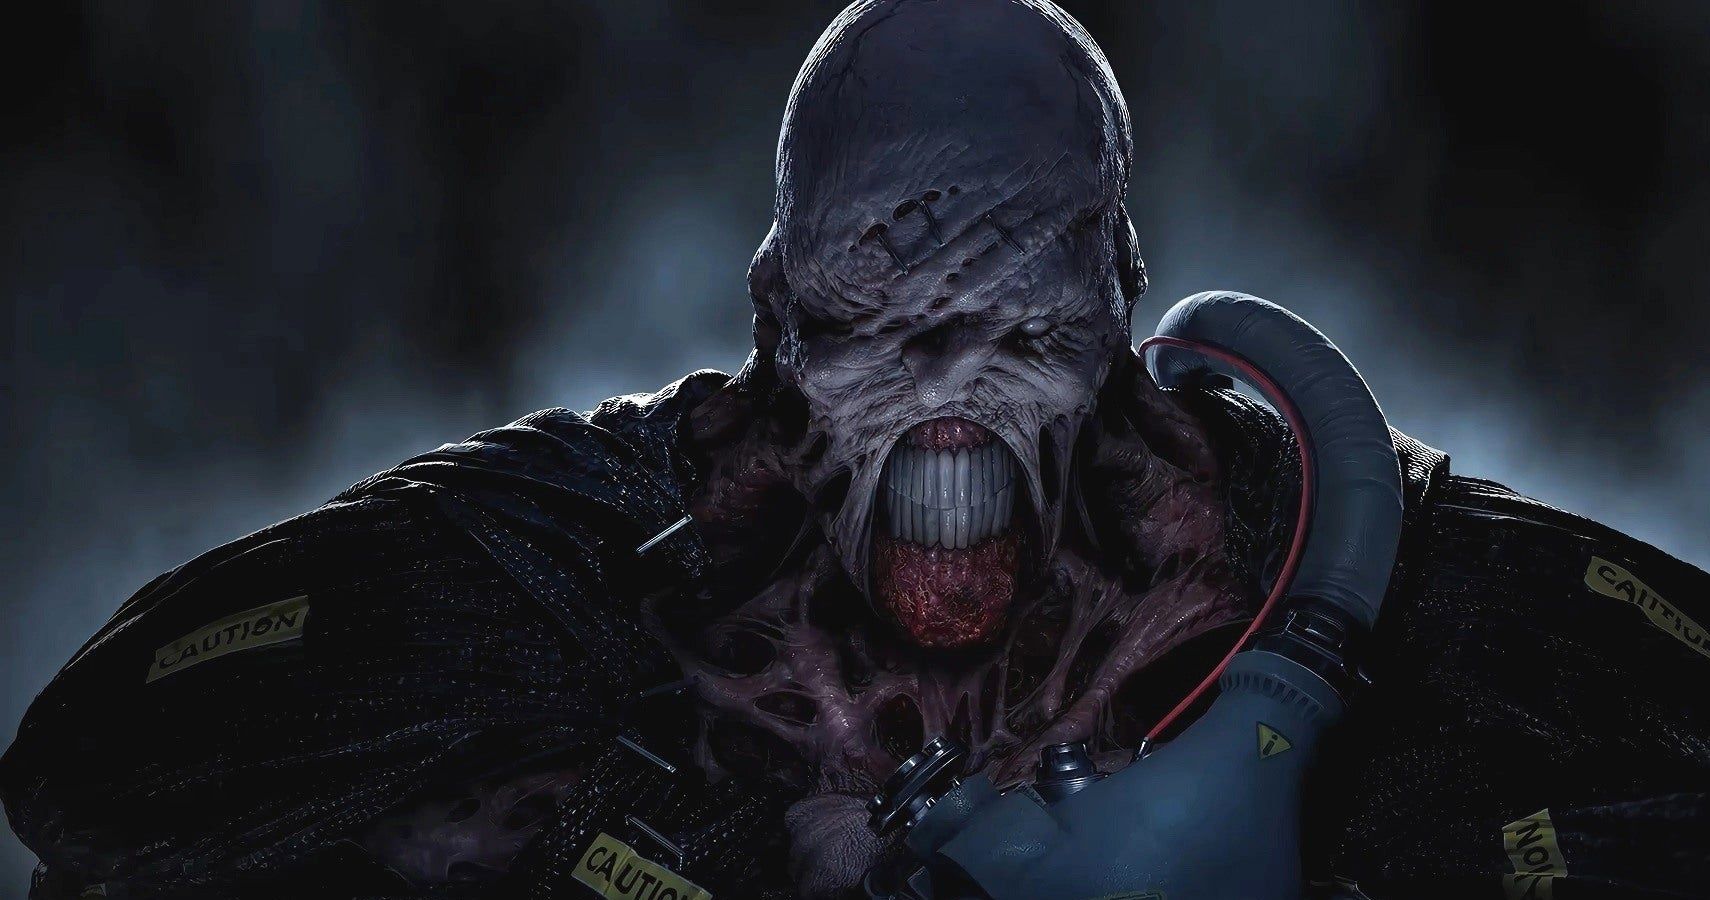 Resident Evil's Mr X Vs Nemesis - Which Monster Is More Powerful?